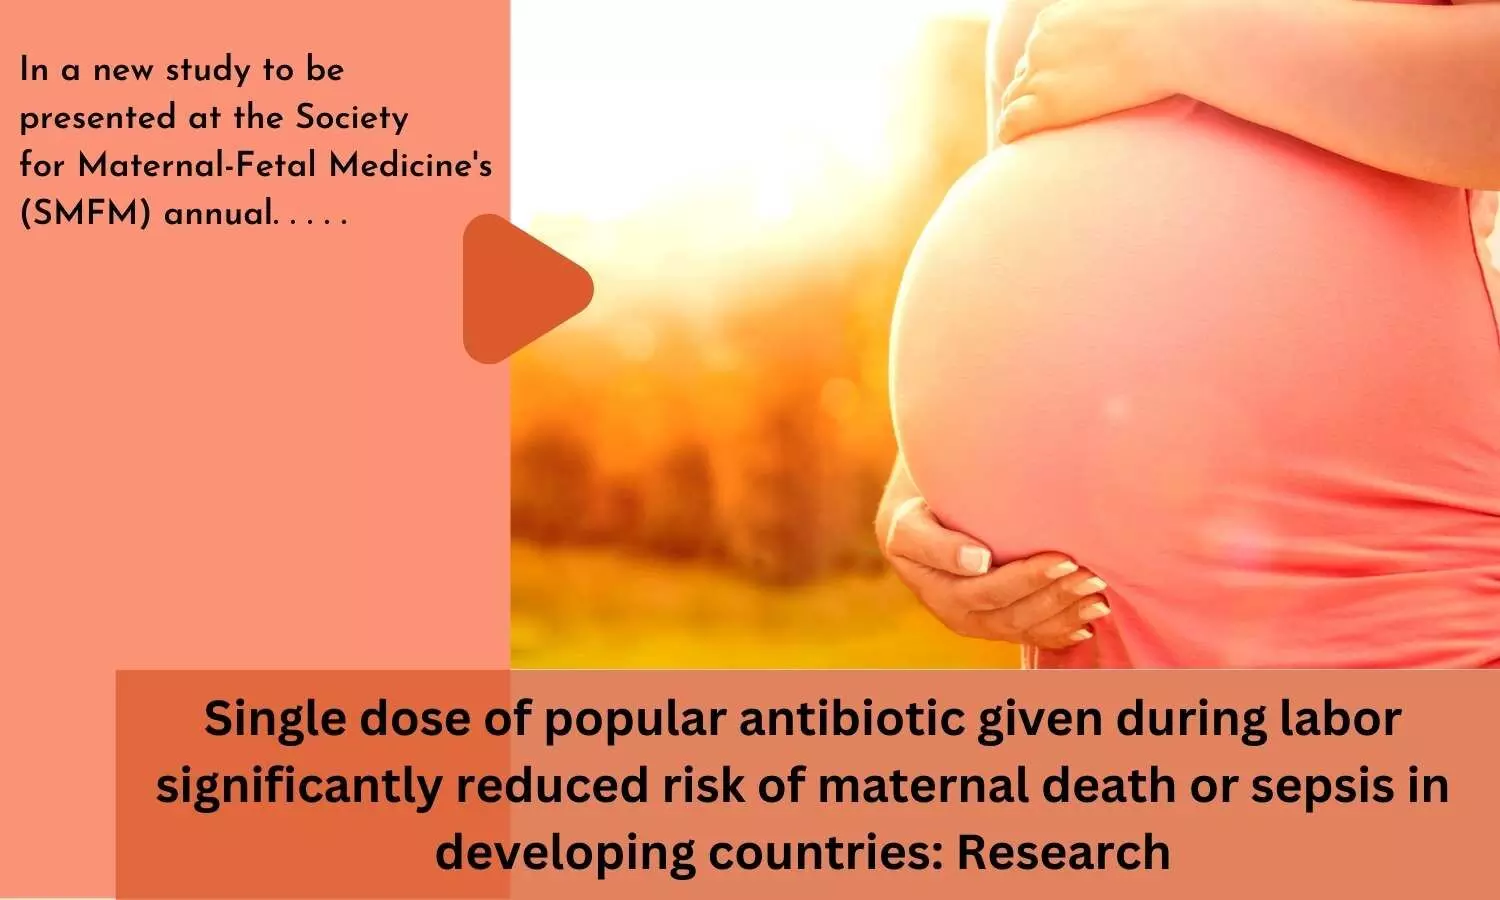 Single dose of popular antibiotic given during labor significantly reduced risk of maternal death or sepsis in developing countries: Research